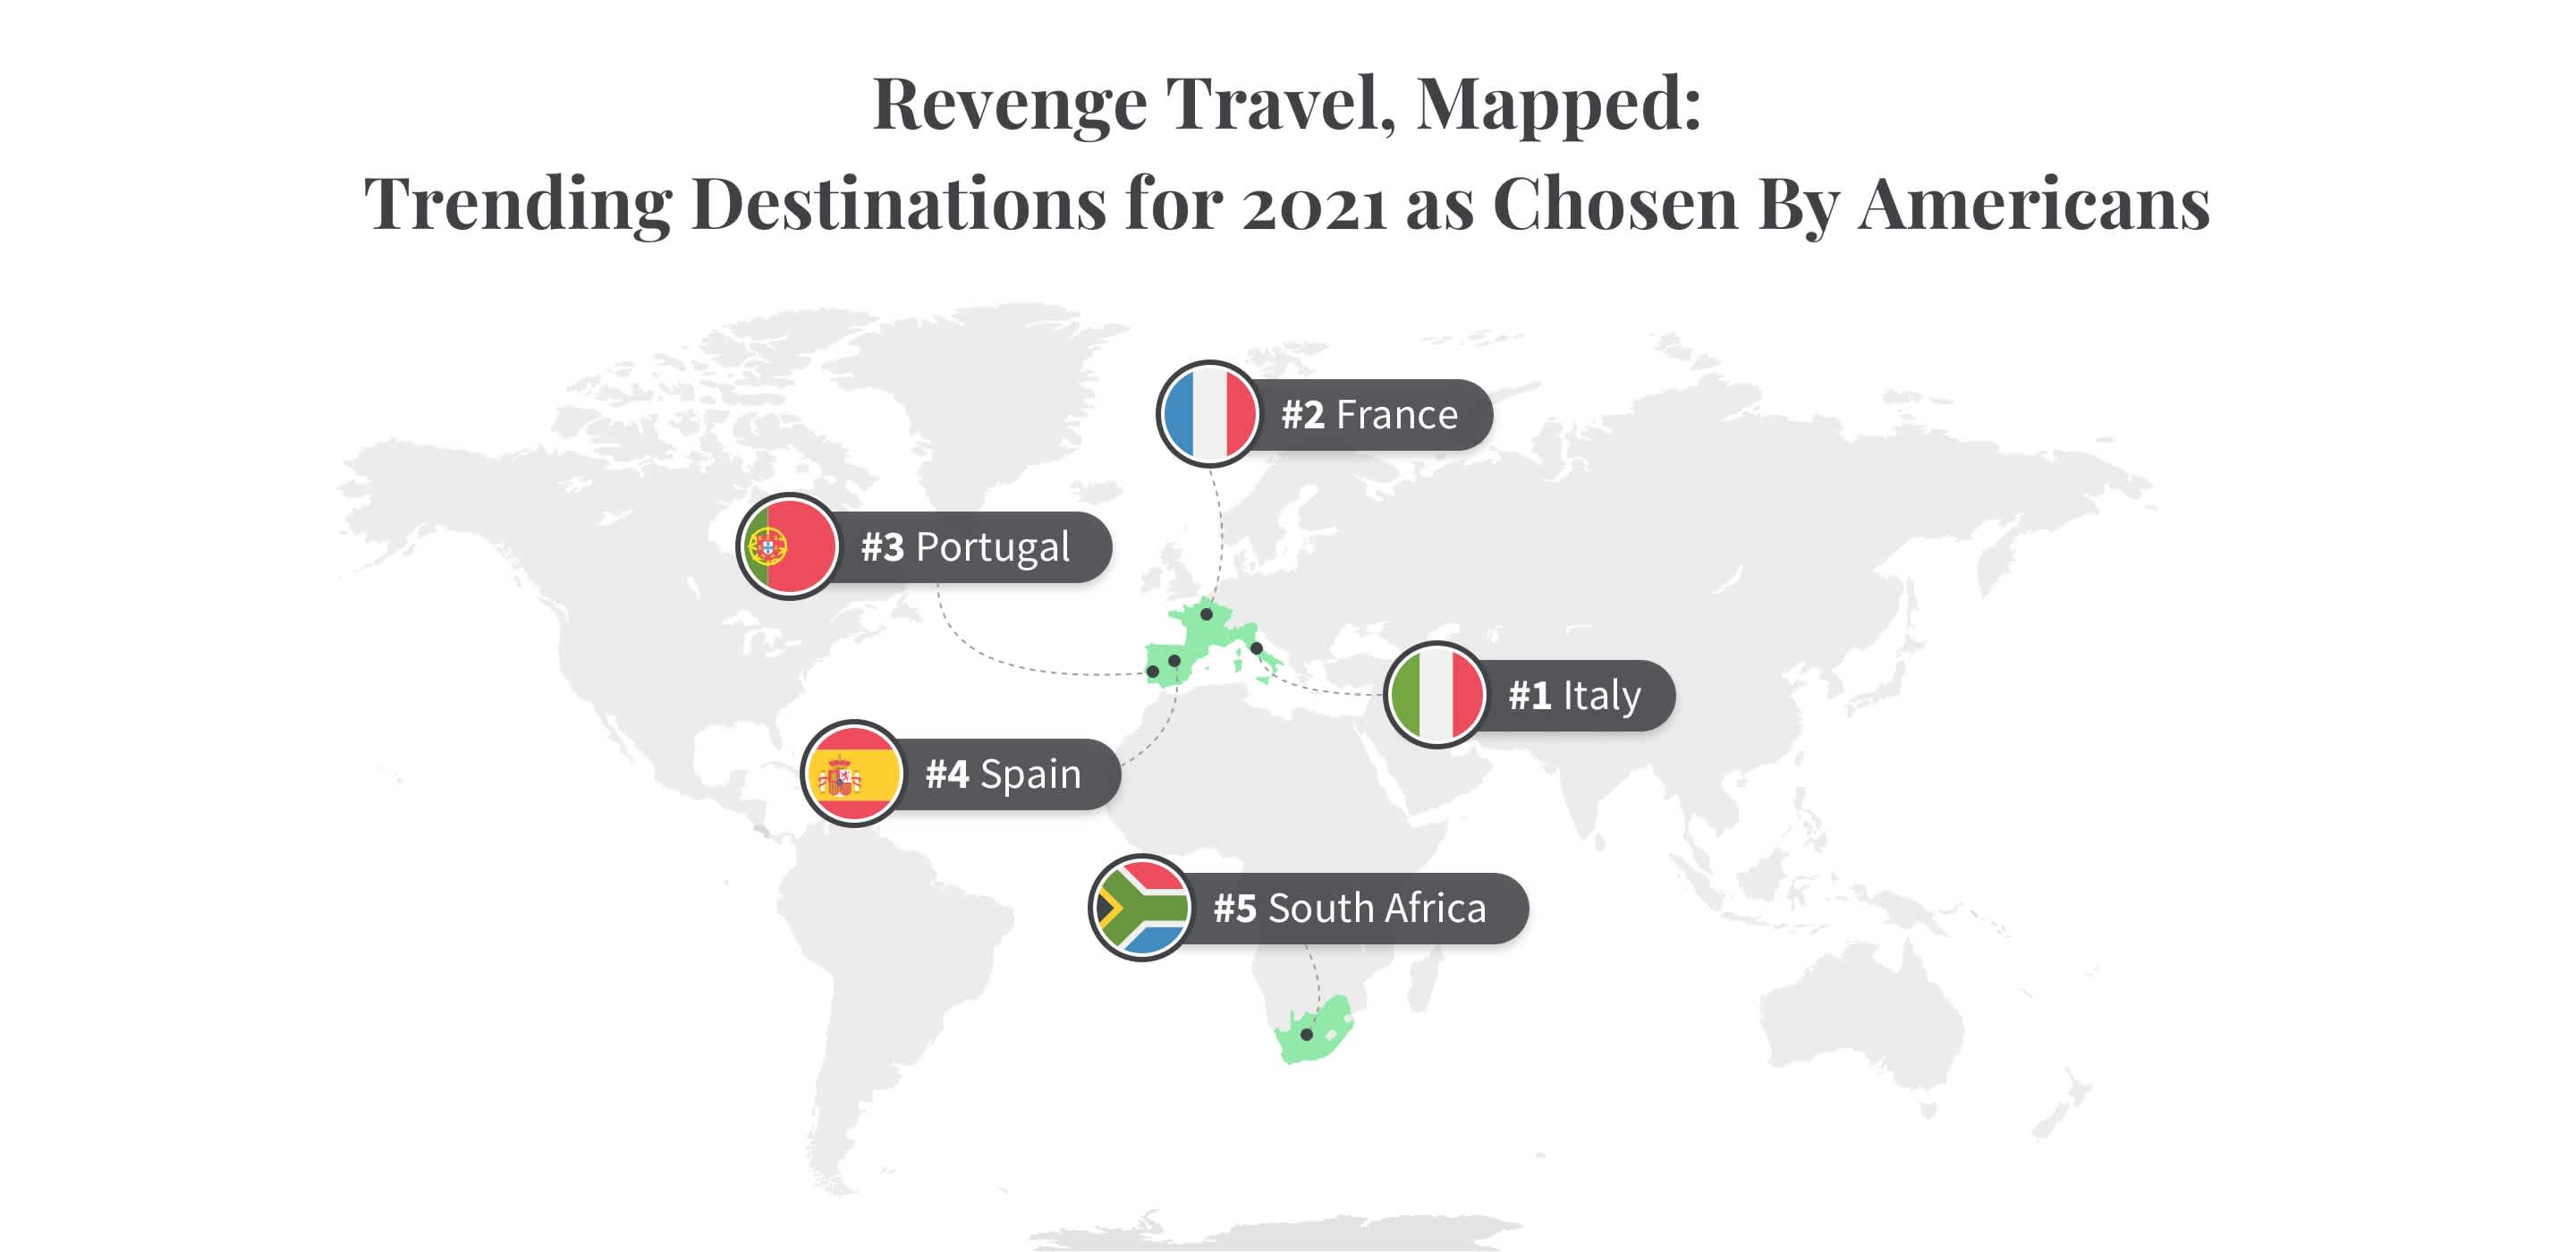 The top trending destinations for 2021, mapped